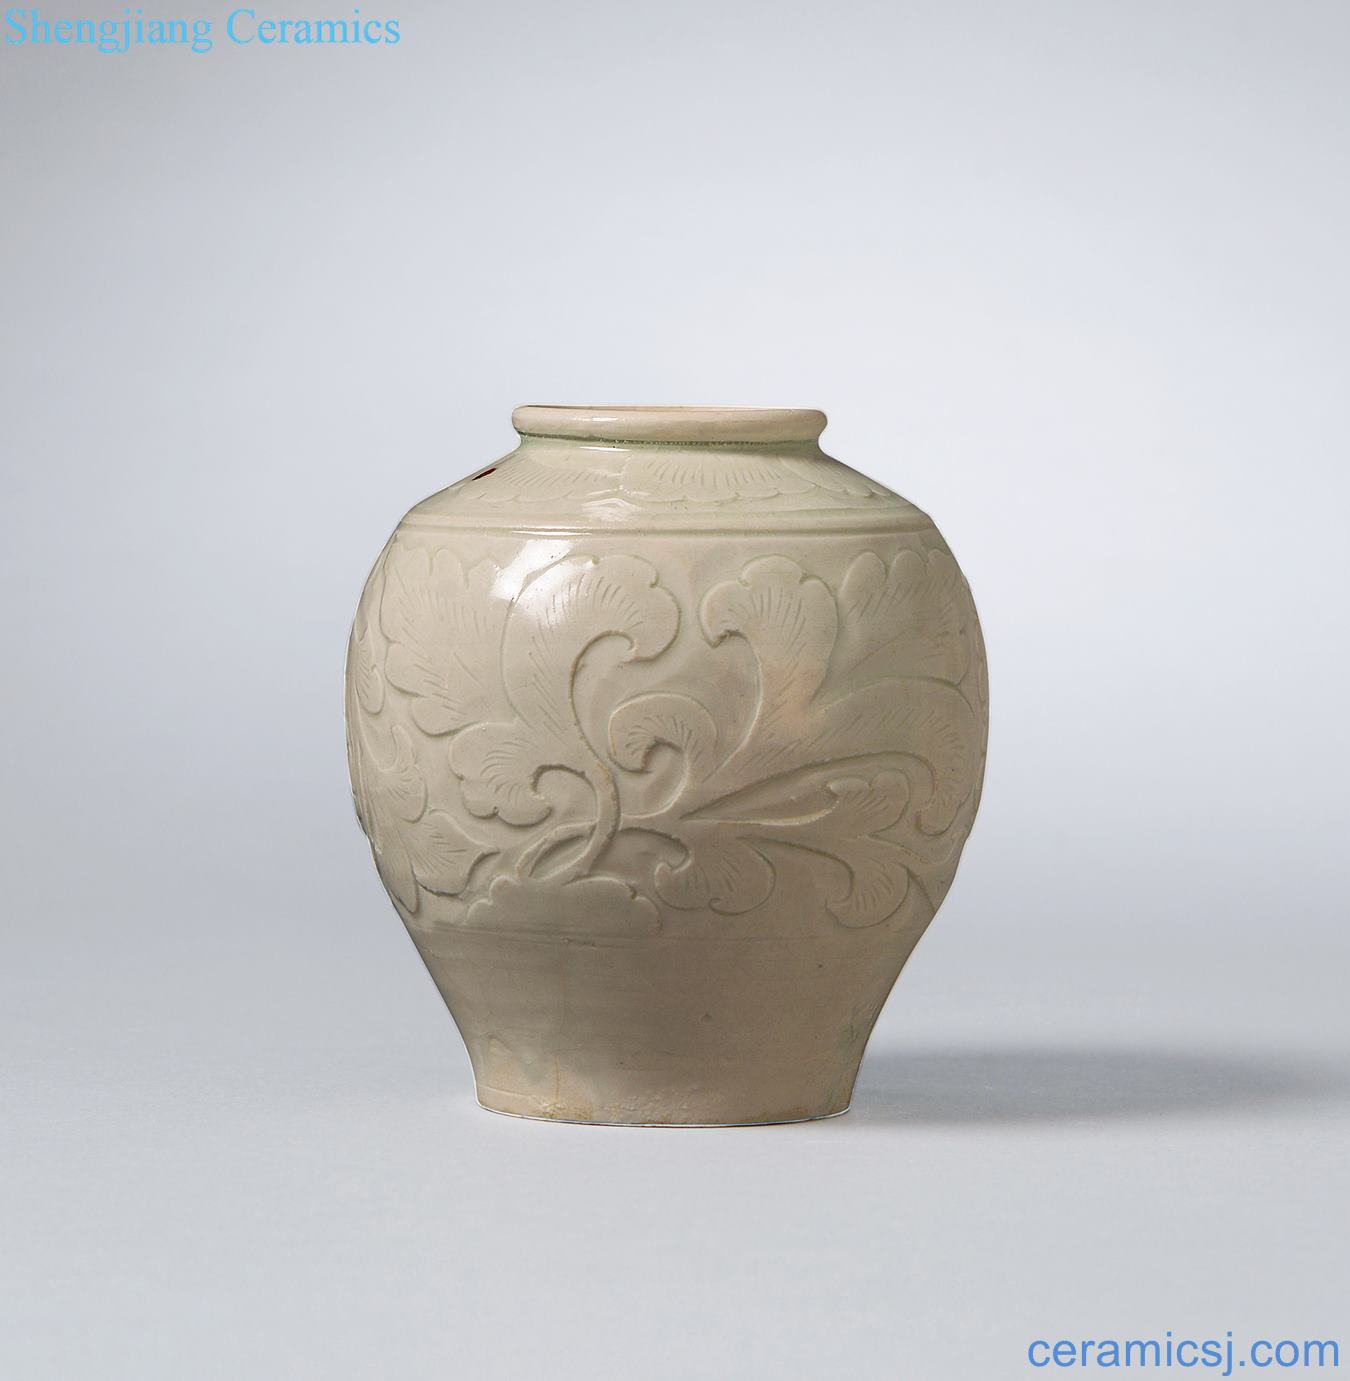 Five generations - northern song dynasty kiln hand-cut cans